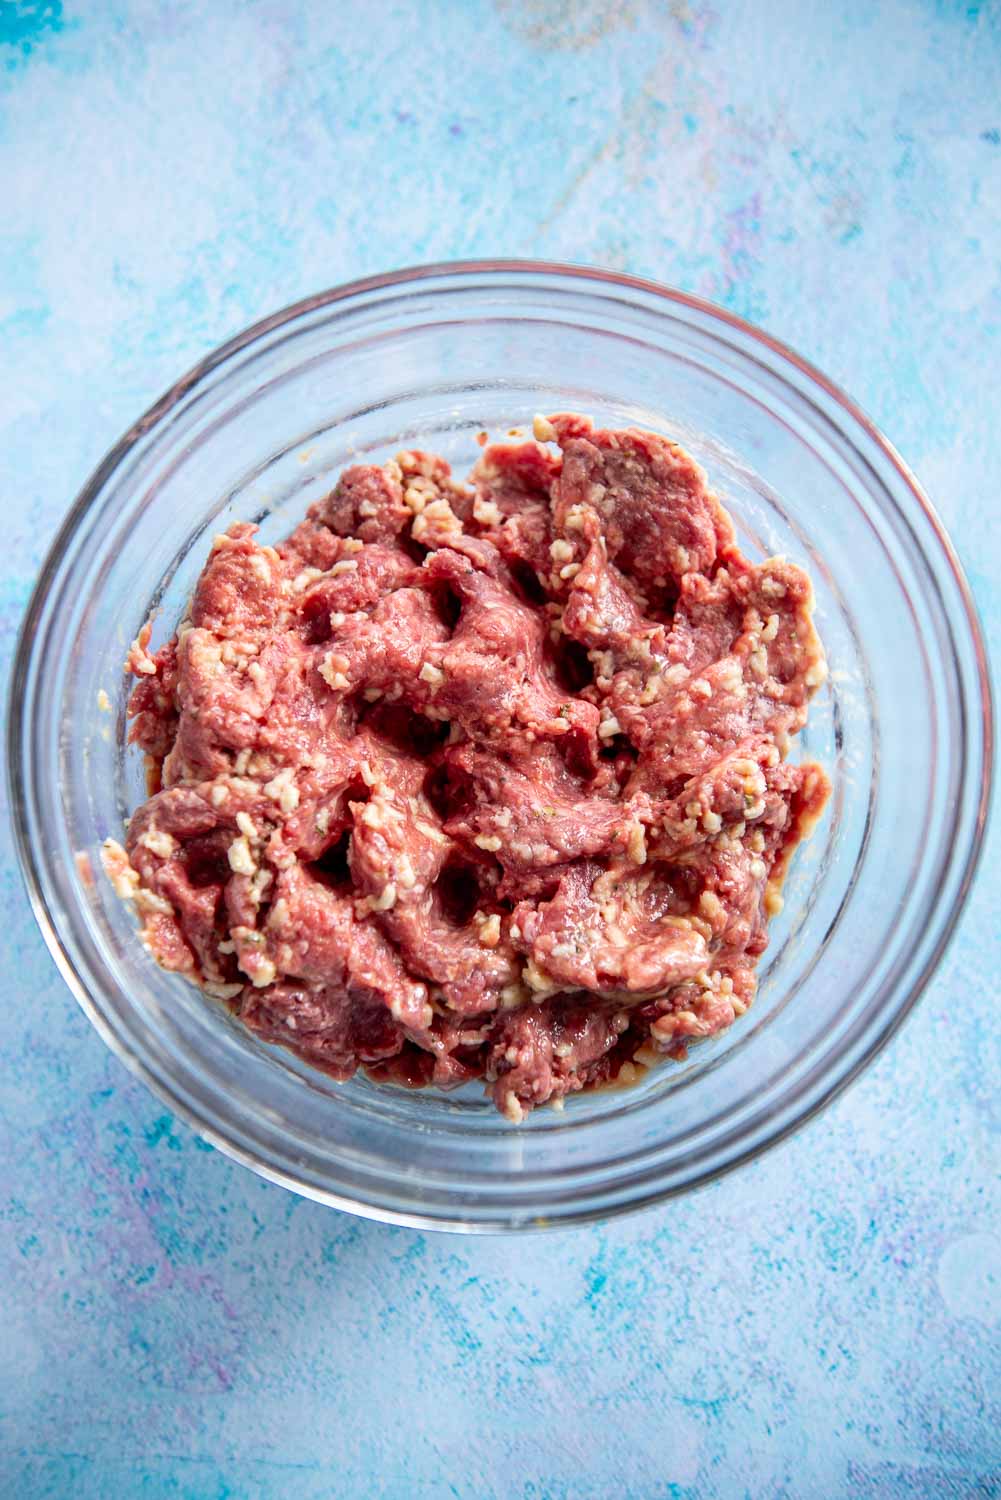 Raw ground beef covered in seasoning in a clear bowl